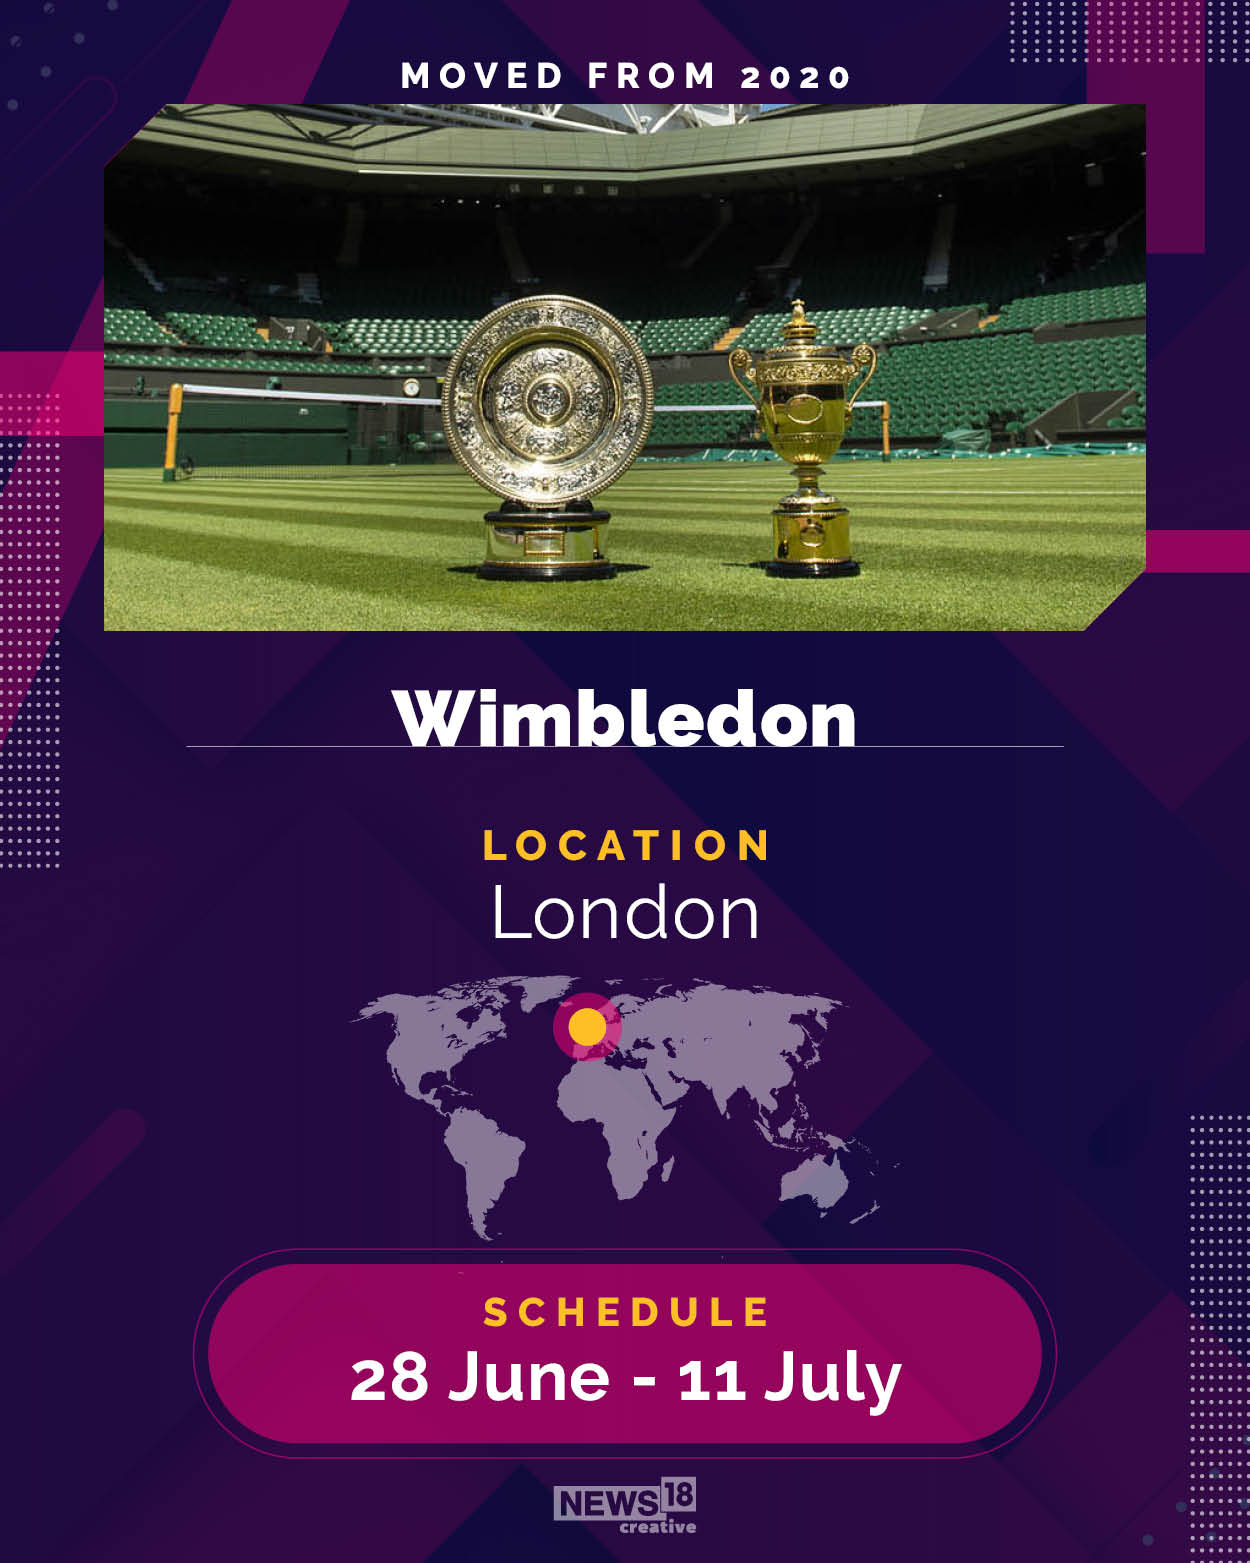 From Wimbledon to Olympics: Major sporting events to look forward to in 2021